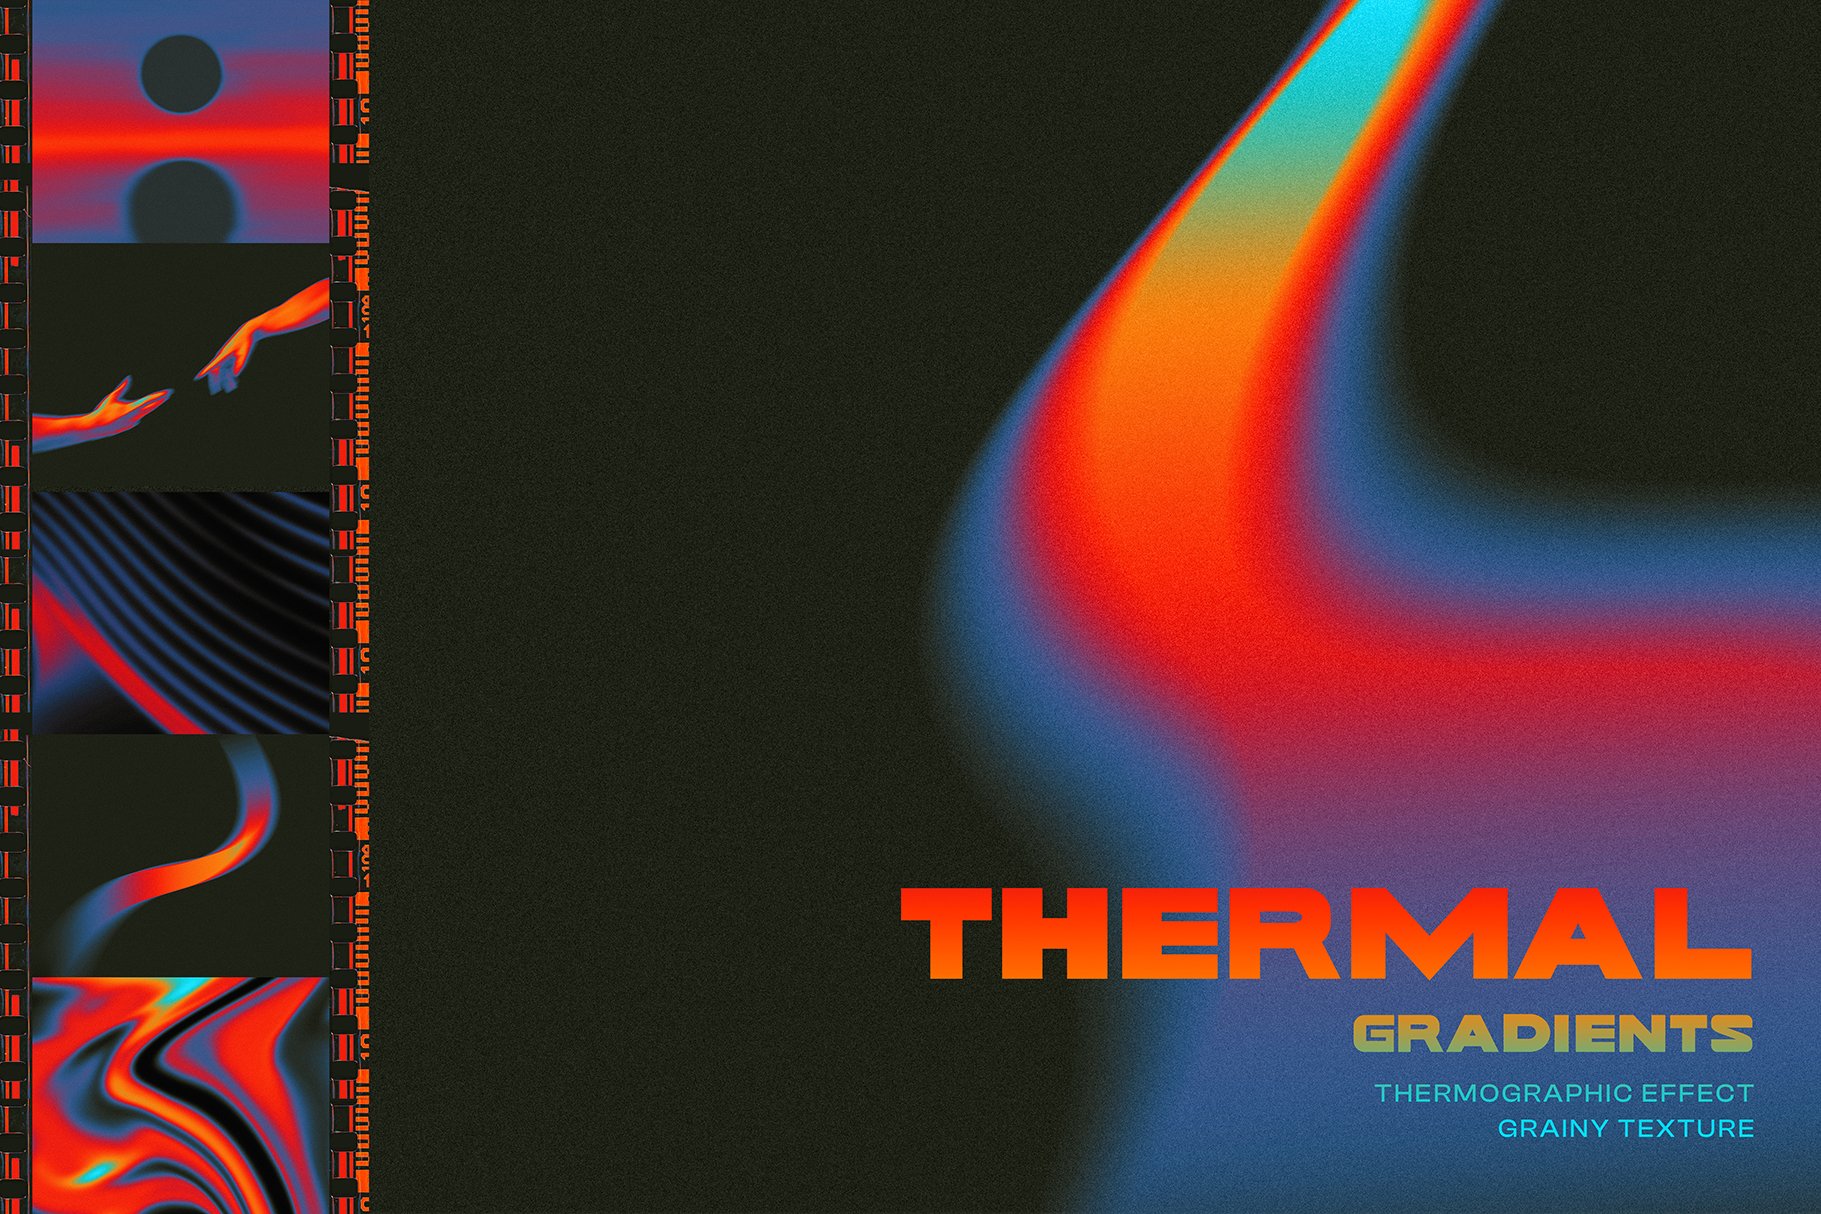 Thermal Gradient Backgrounds Vol.1 cover image.